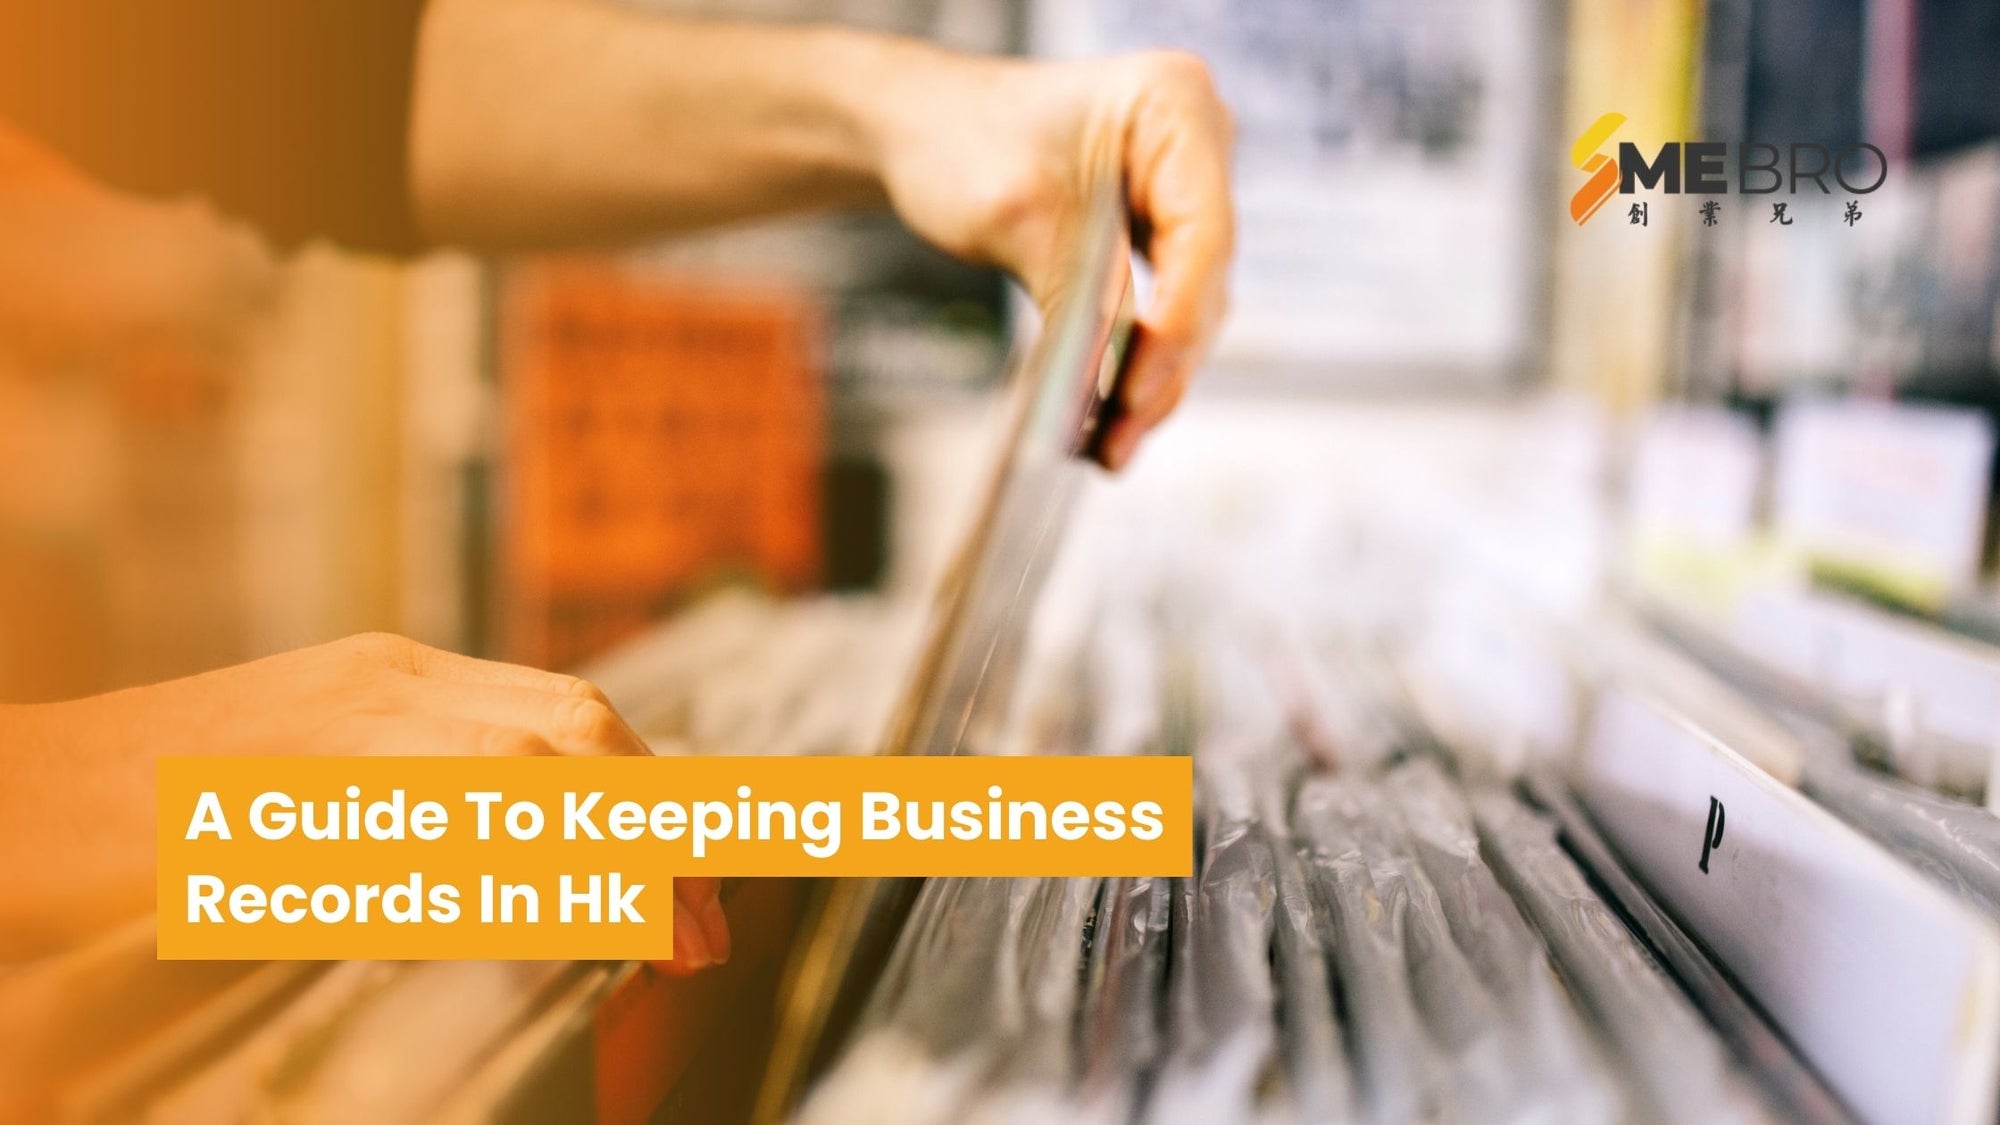 A Guide To Keeping Business Records In HK